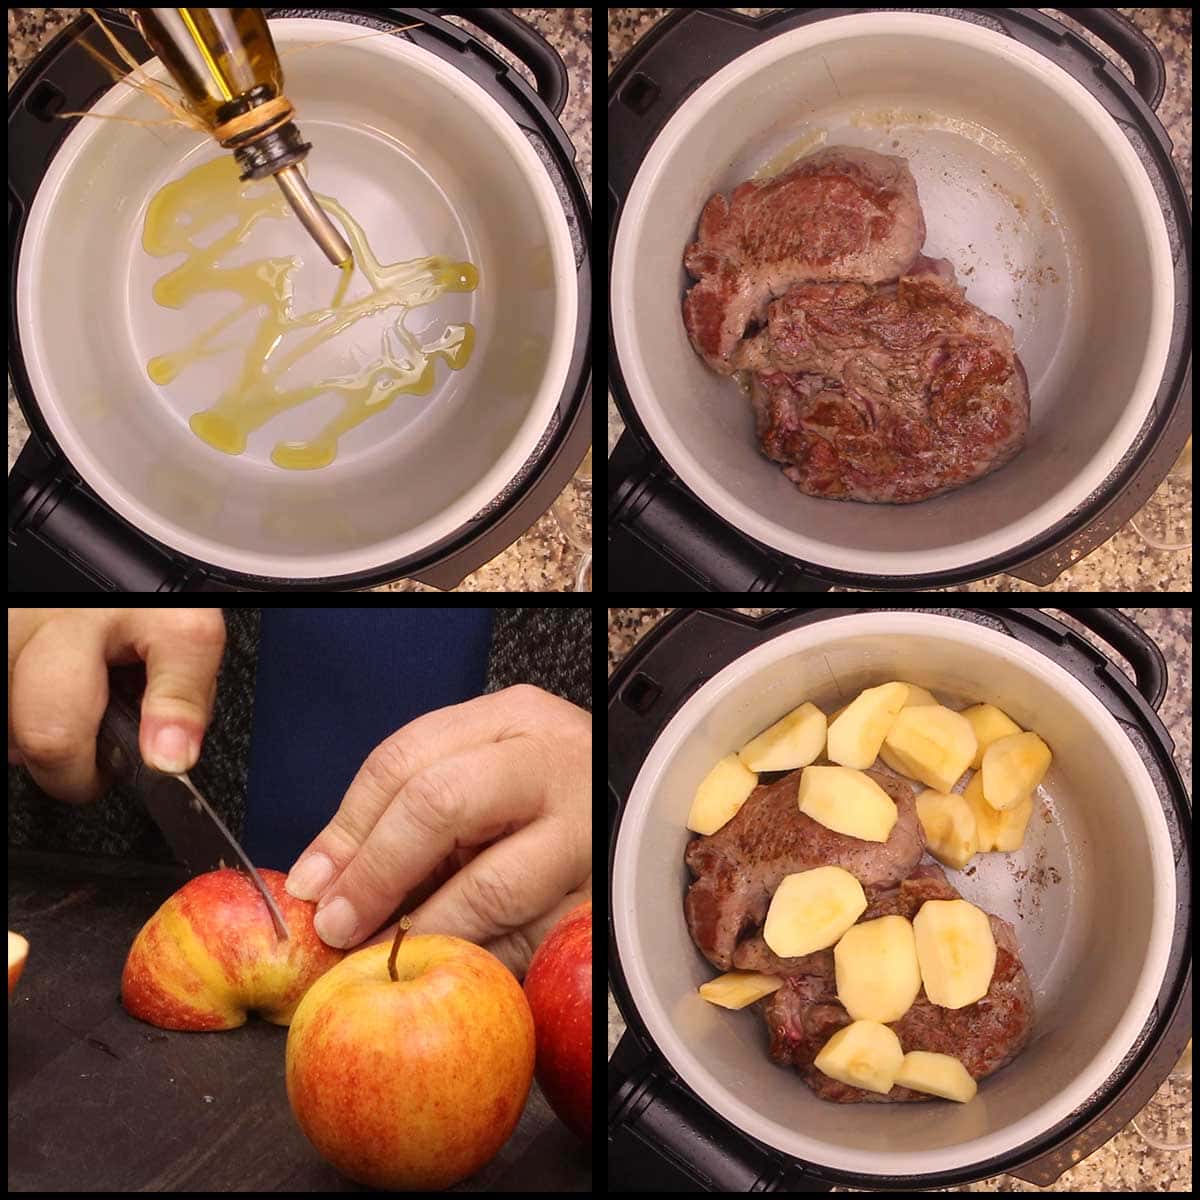 searing the pork and slicing the apples for pork and sauerkraut